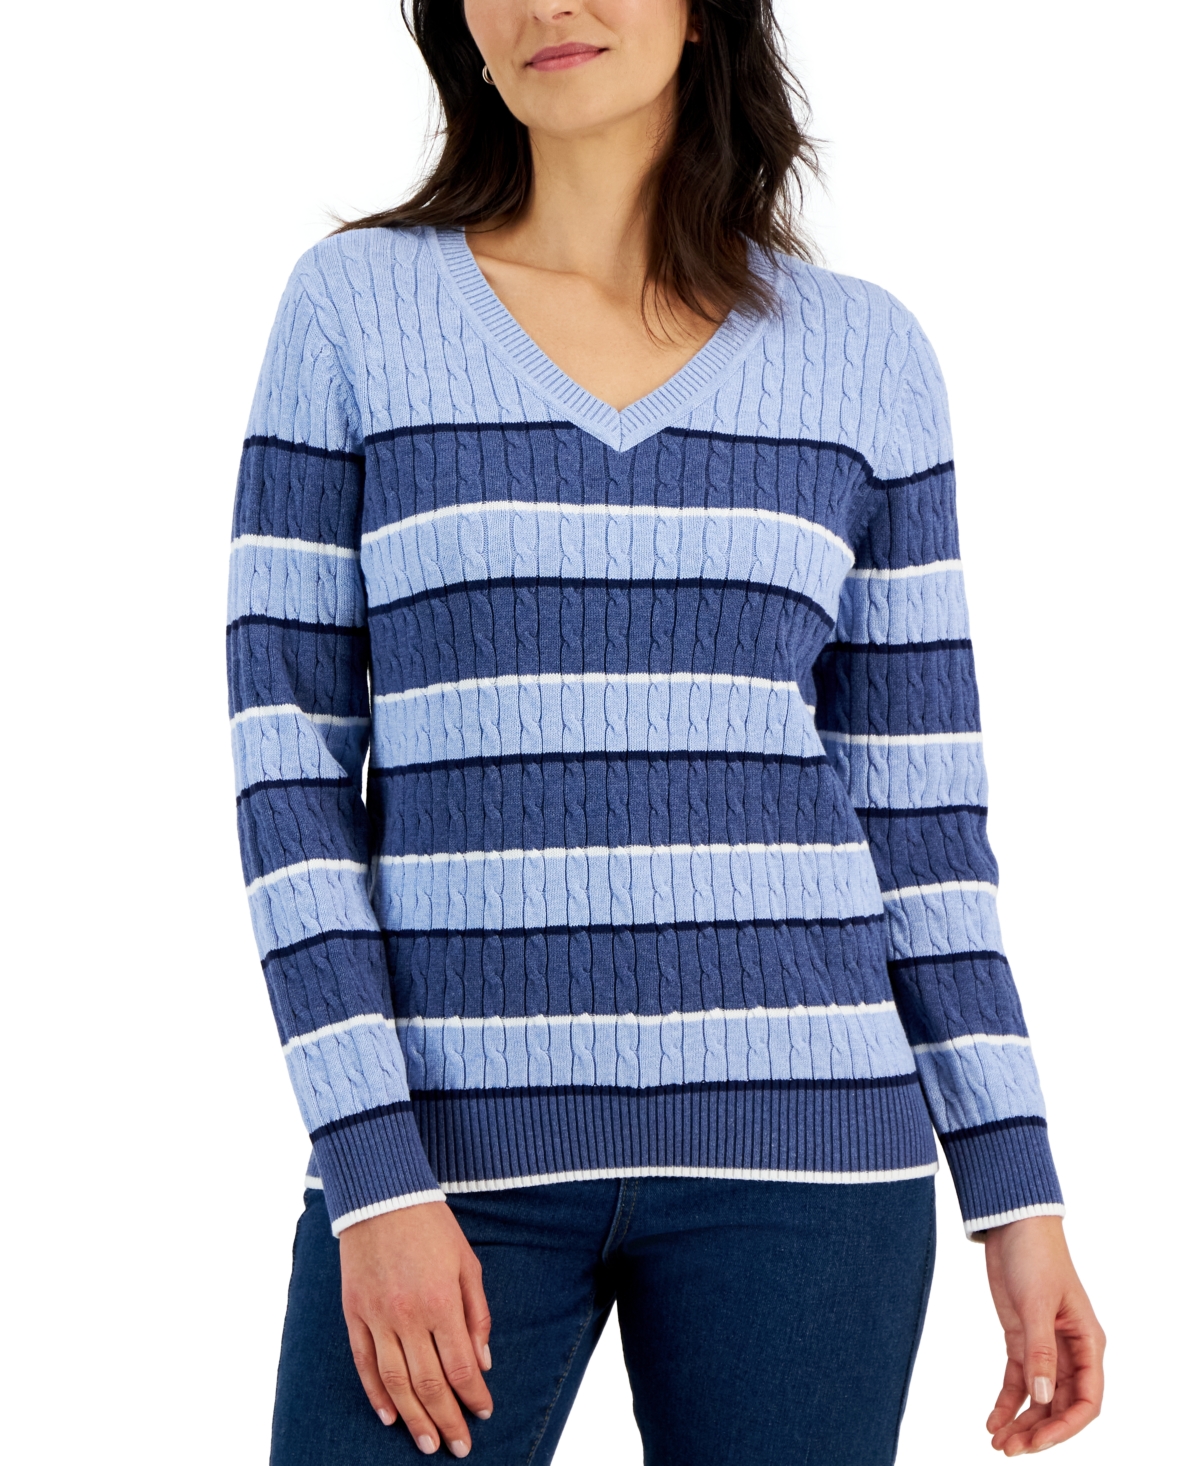 Gianna Cotton Striped Cable V-Neck Sweater, Created for Macy's - Heather Indigo